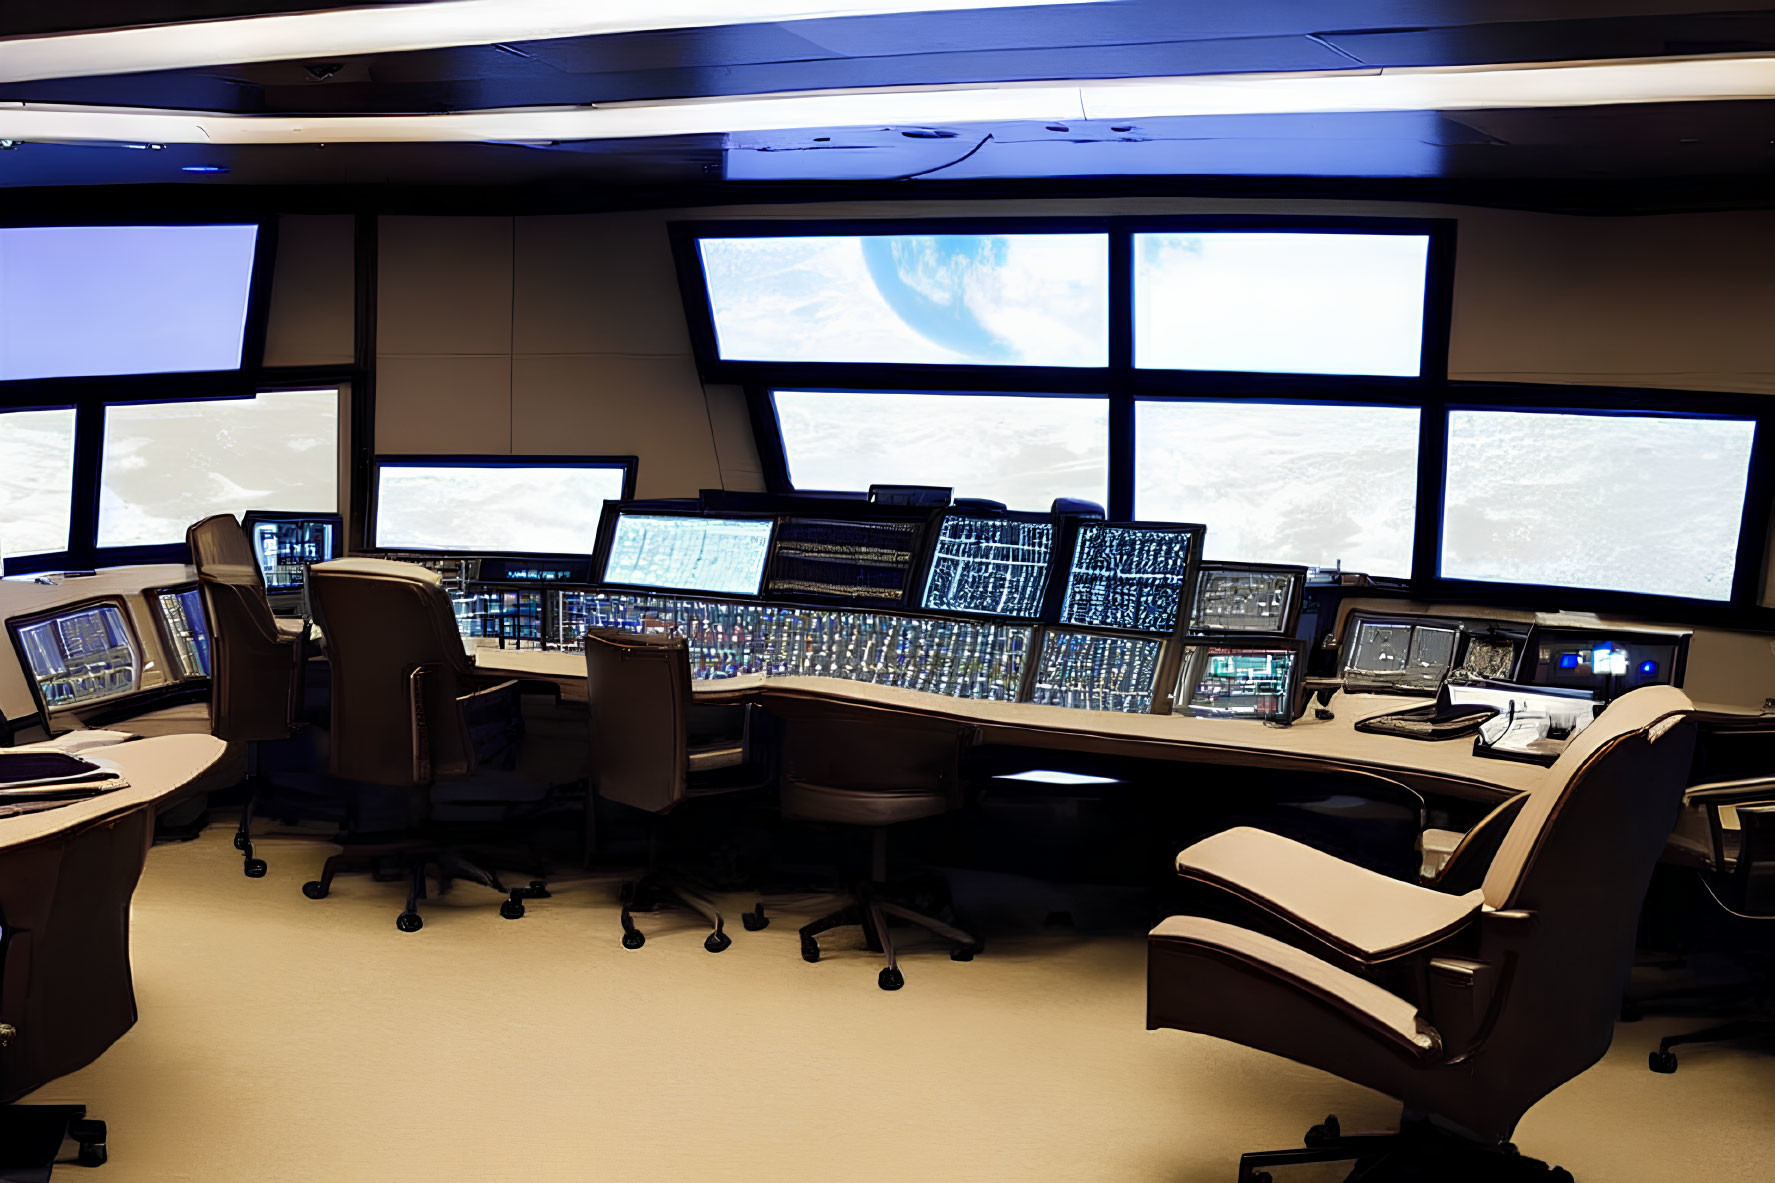 Control room with multiple screens, Earth views, control panel, switches, empty chairs, dim lighting